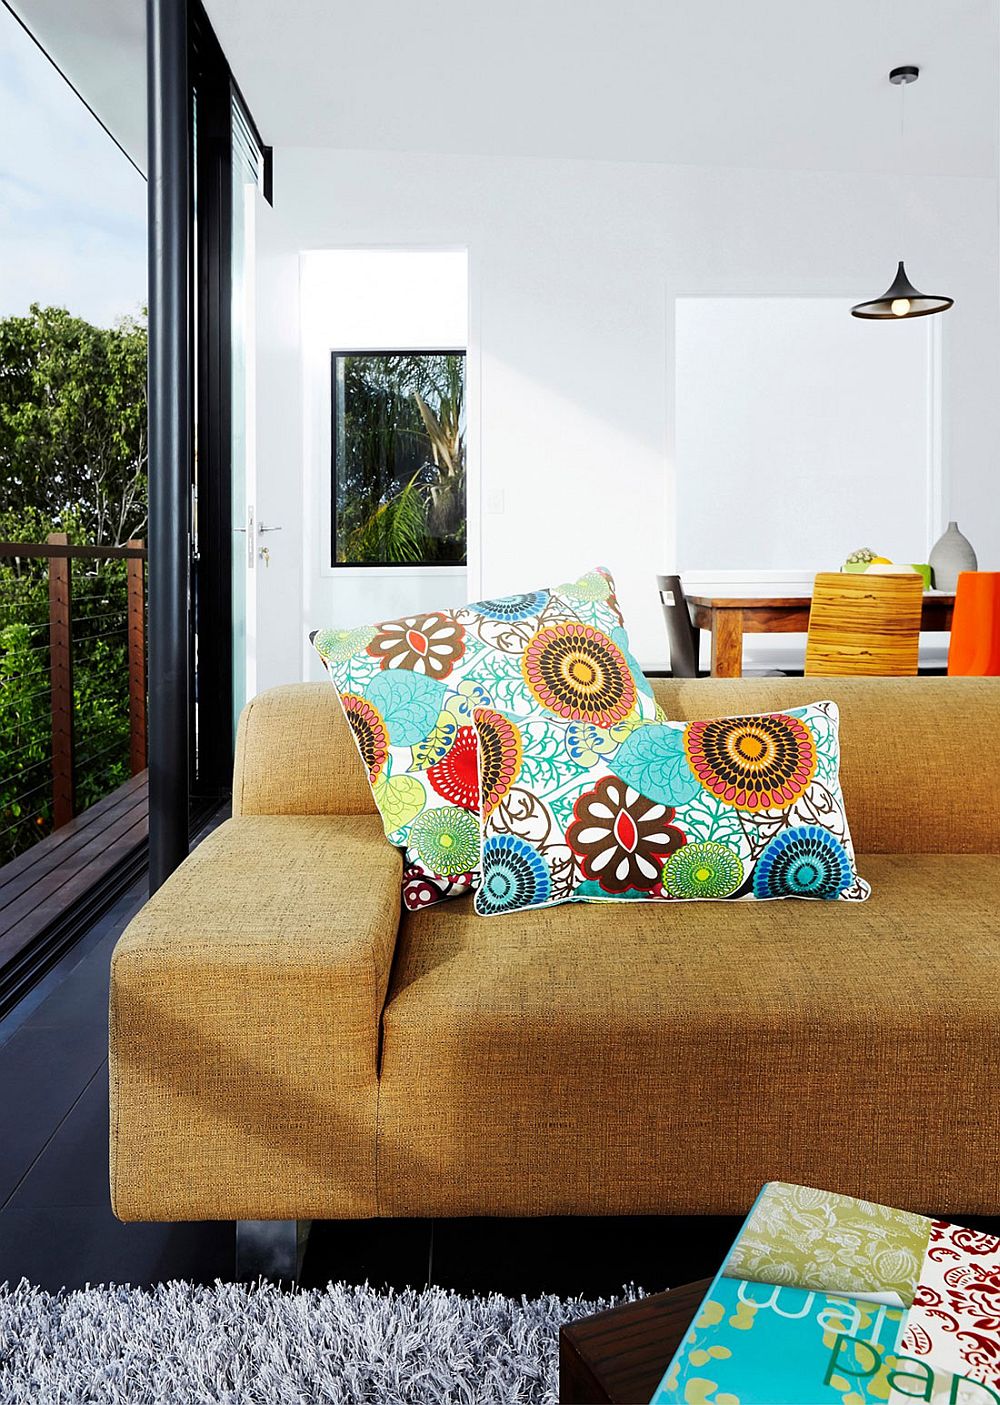 Neutral backdrop of the gardenhouse is enlivened by colorful decor and accessories